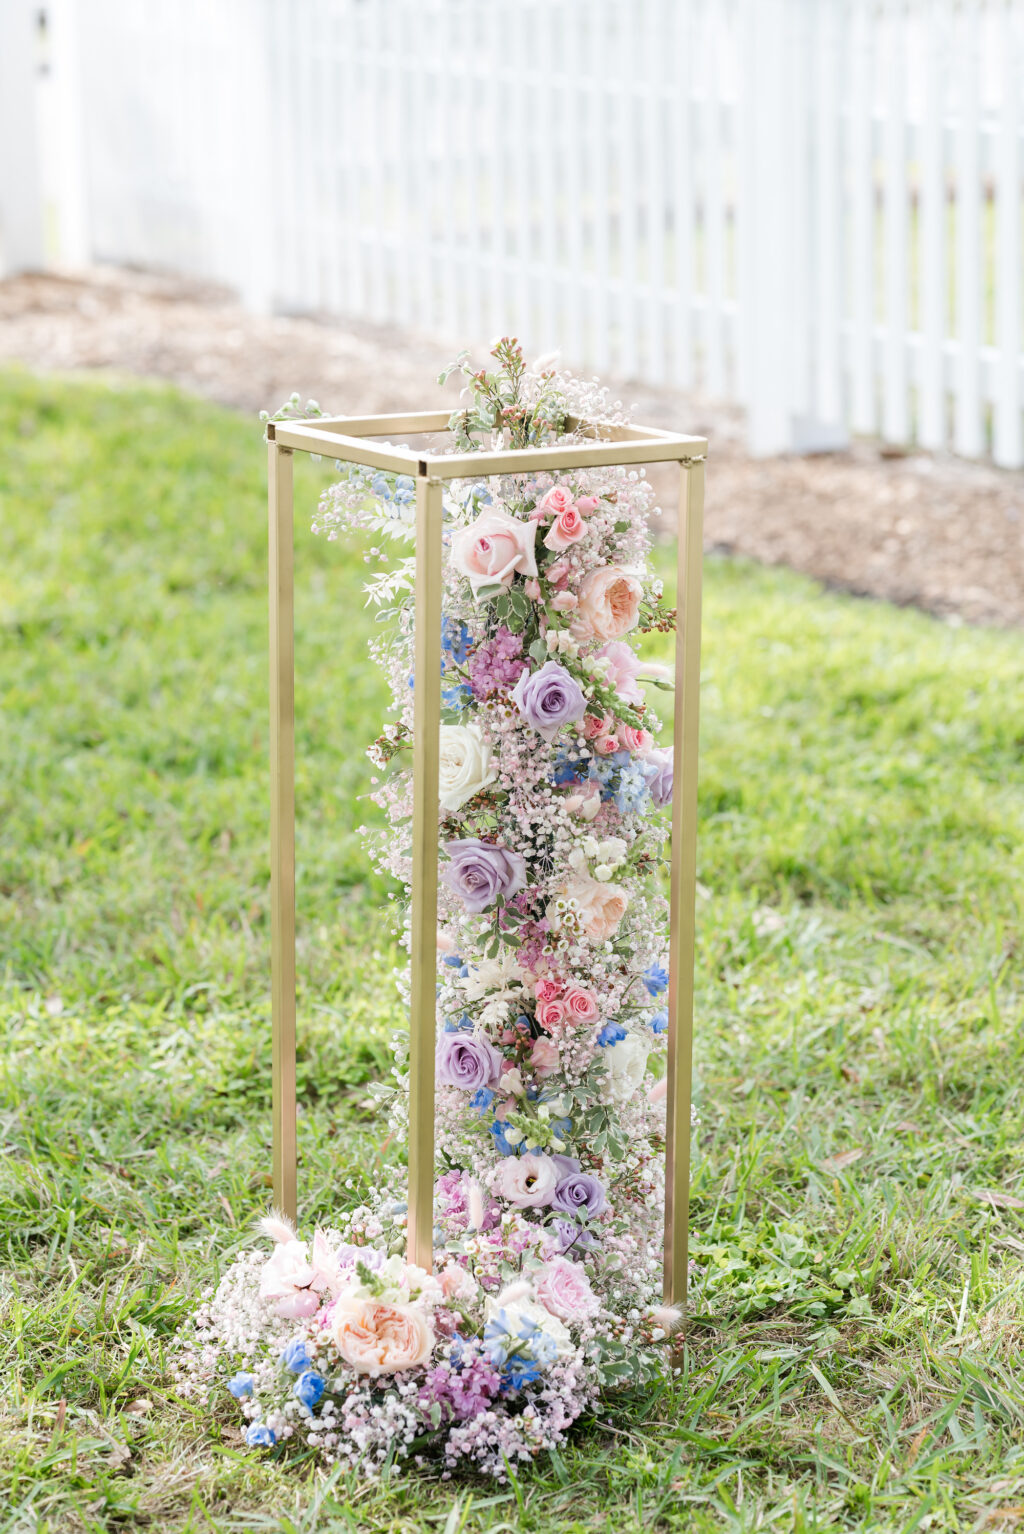 Whimsical Gold Flower Stand with Purple, Pink, and Blush Roses with Baby's Breath | Tampa Bay Florist Save The Date Florida